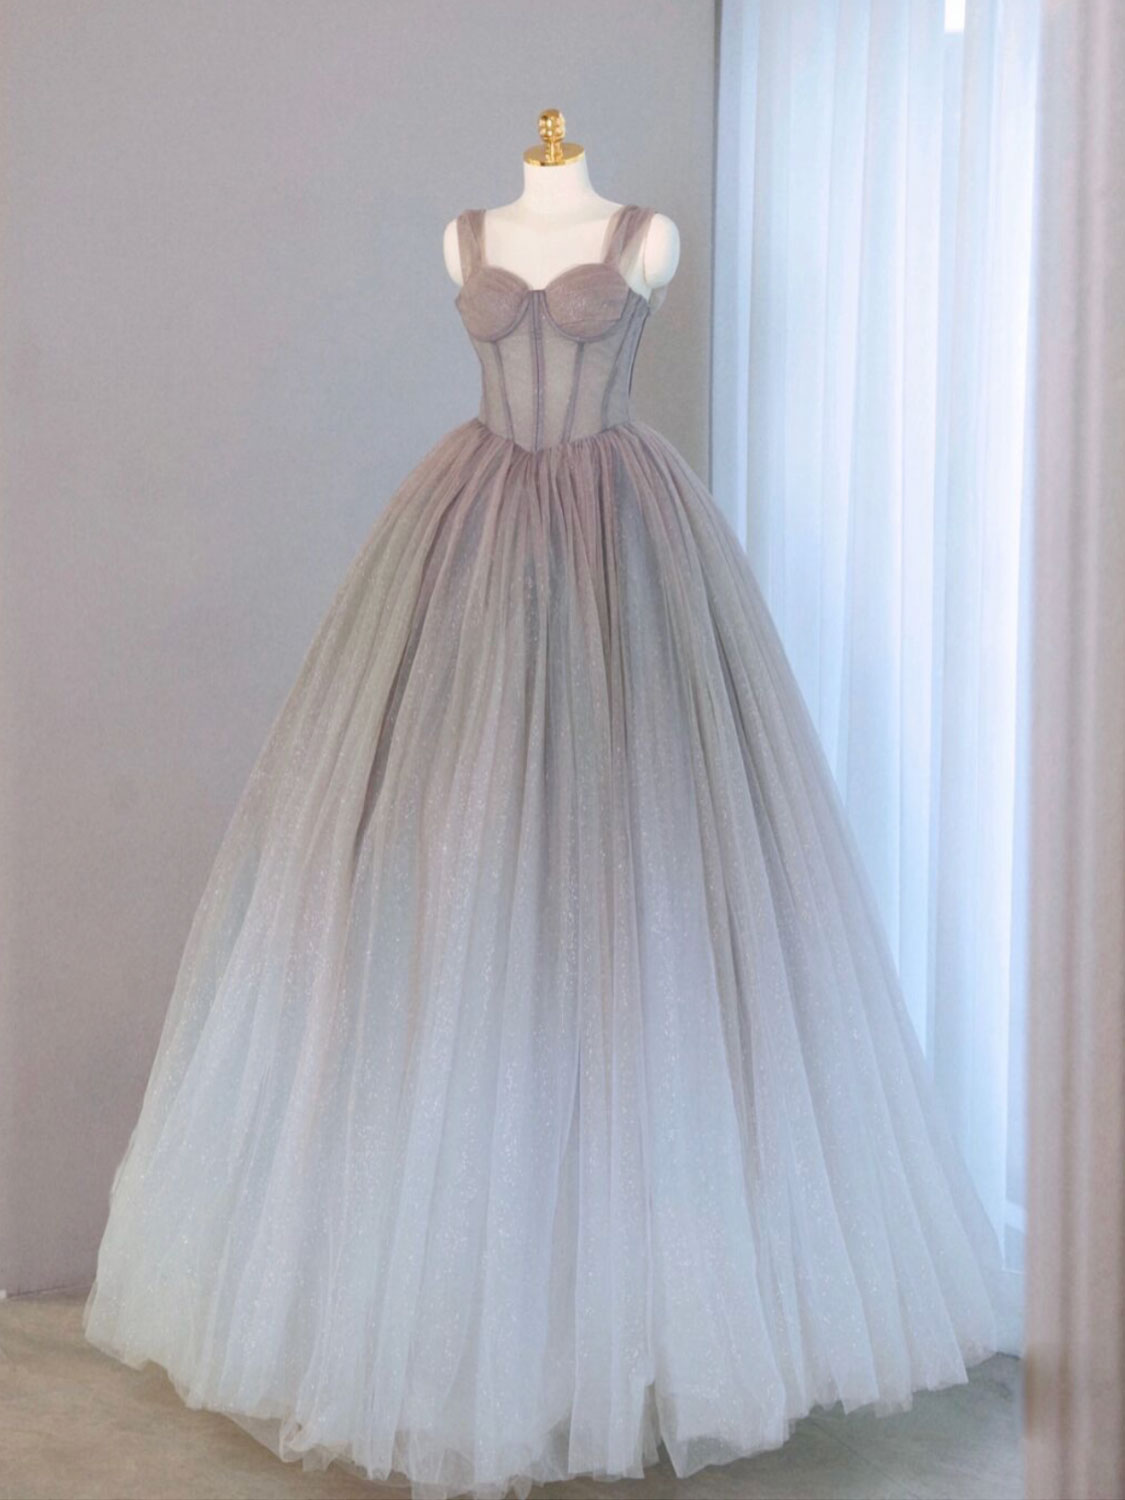 Prom Dress Boutiques, A-Line Gray Sweetheart Neck Long Prom Dresses, Gray Formal Evening Dress